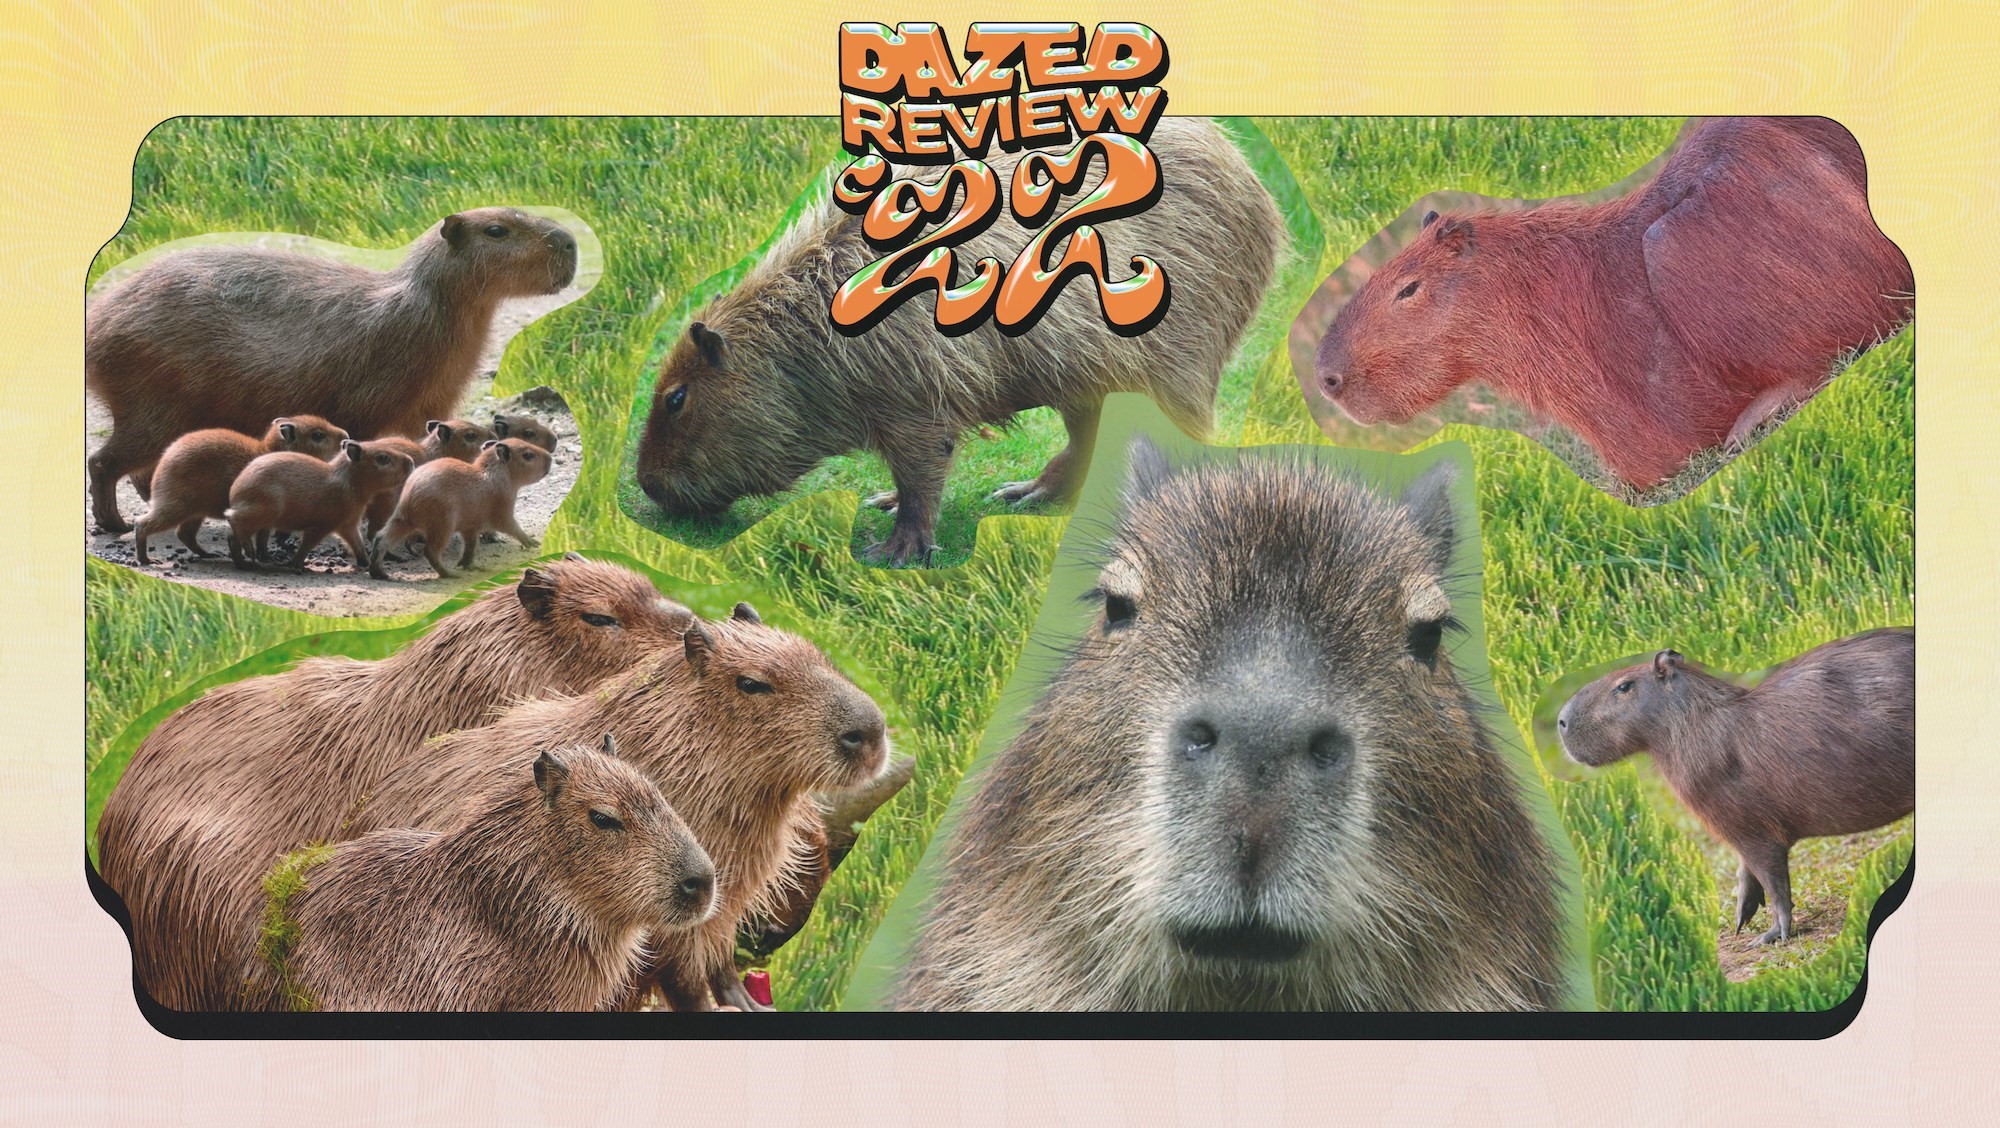 2022 was the year of the capybara